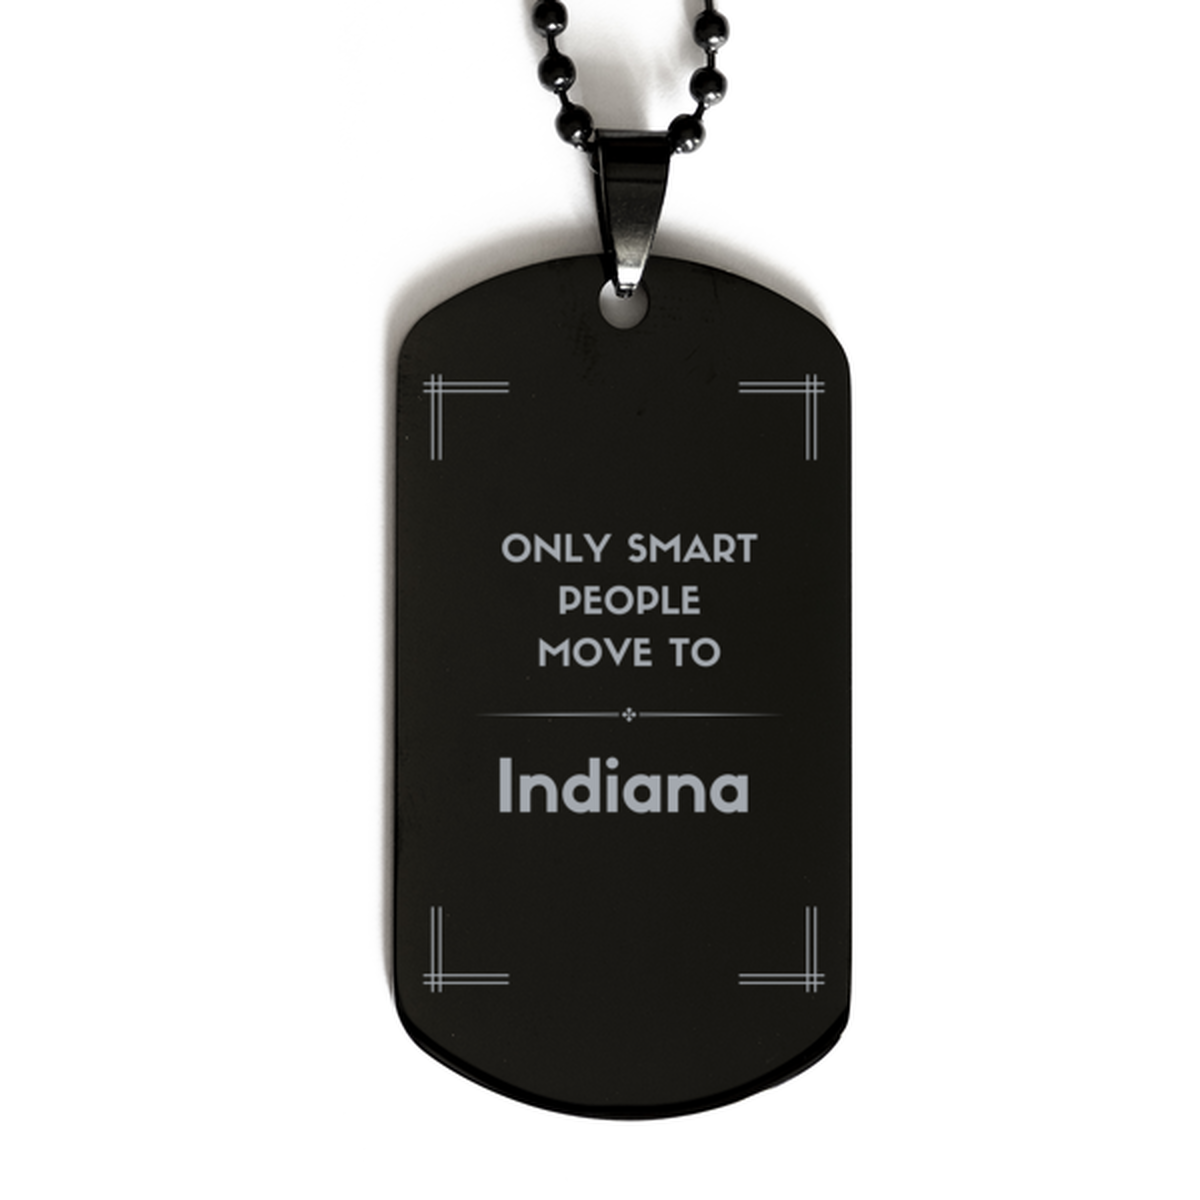 Only smart people move to Indiana Black Dog Tag, Gag Gifts For Indiana, Move to Indiana Gifts for Friends Coworker Funny Saying Quote